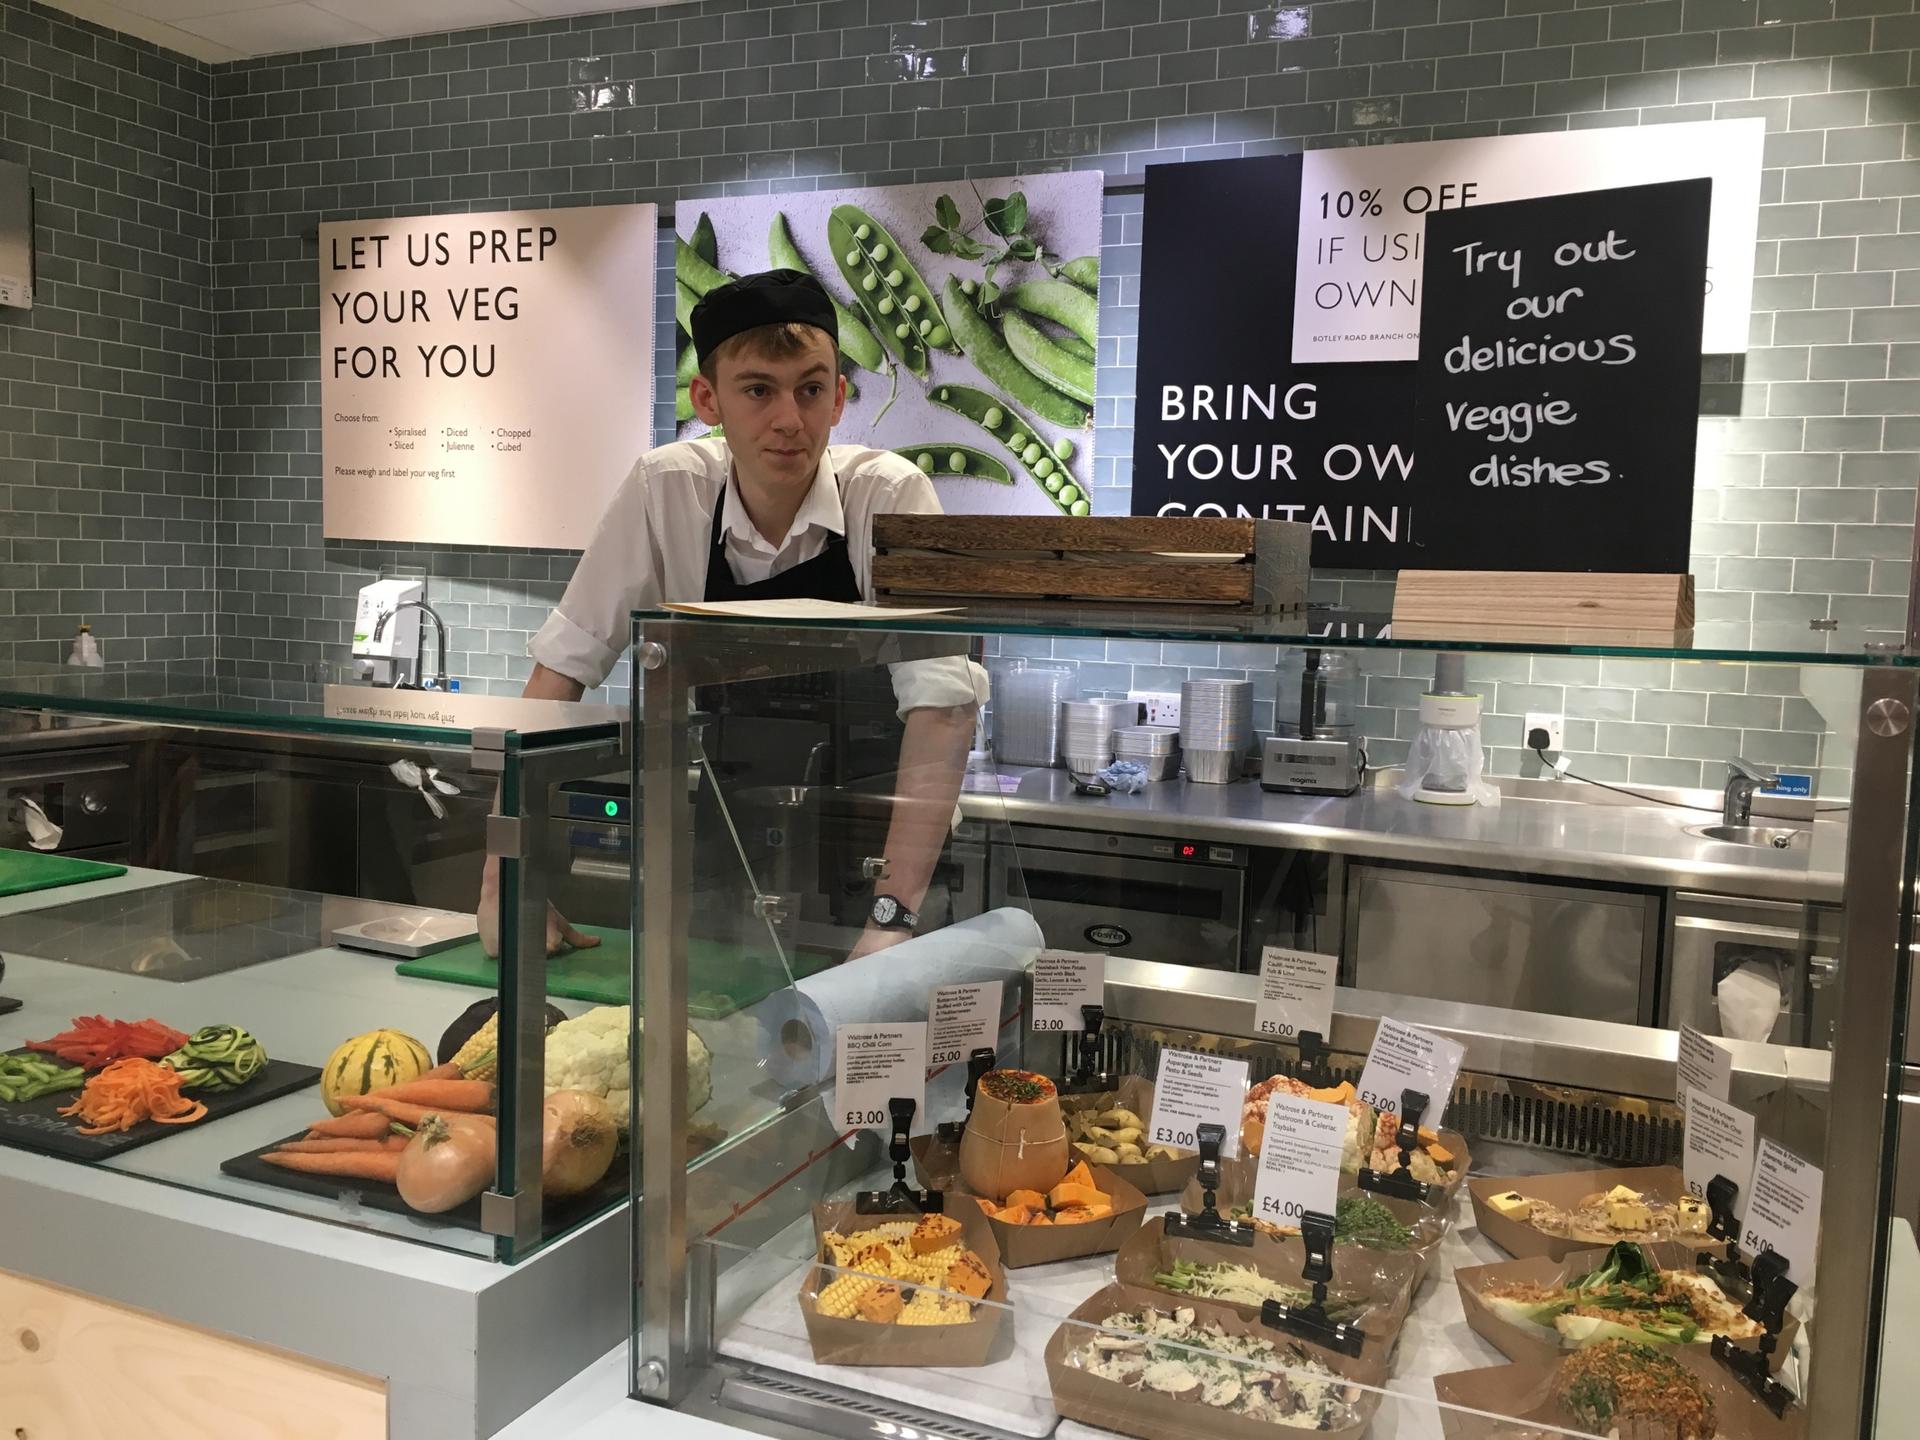 Customers can shop at the Waitrose deli without using plastic packaging.